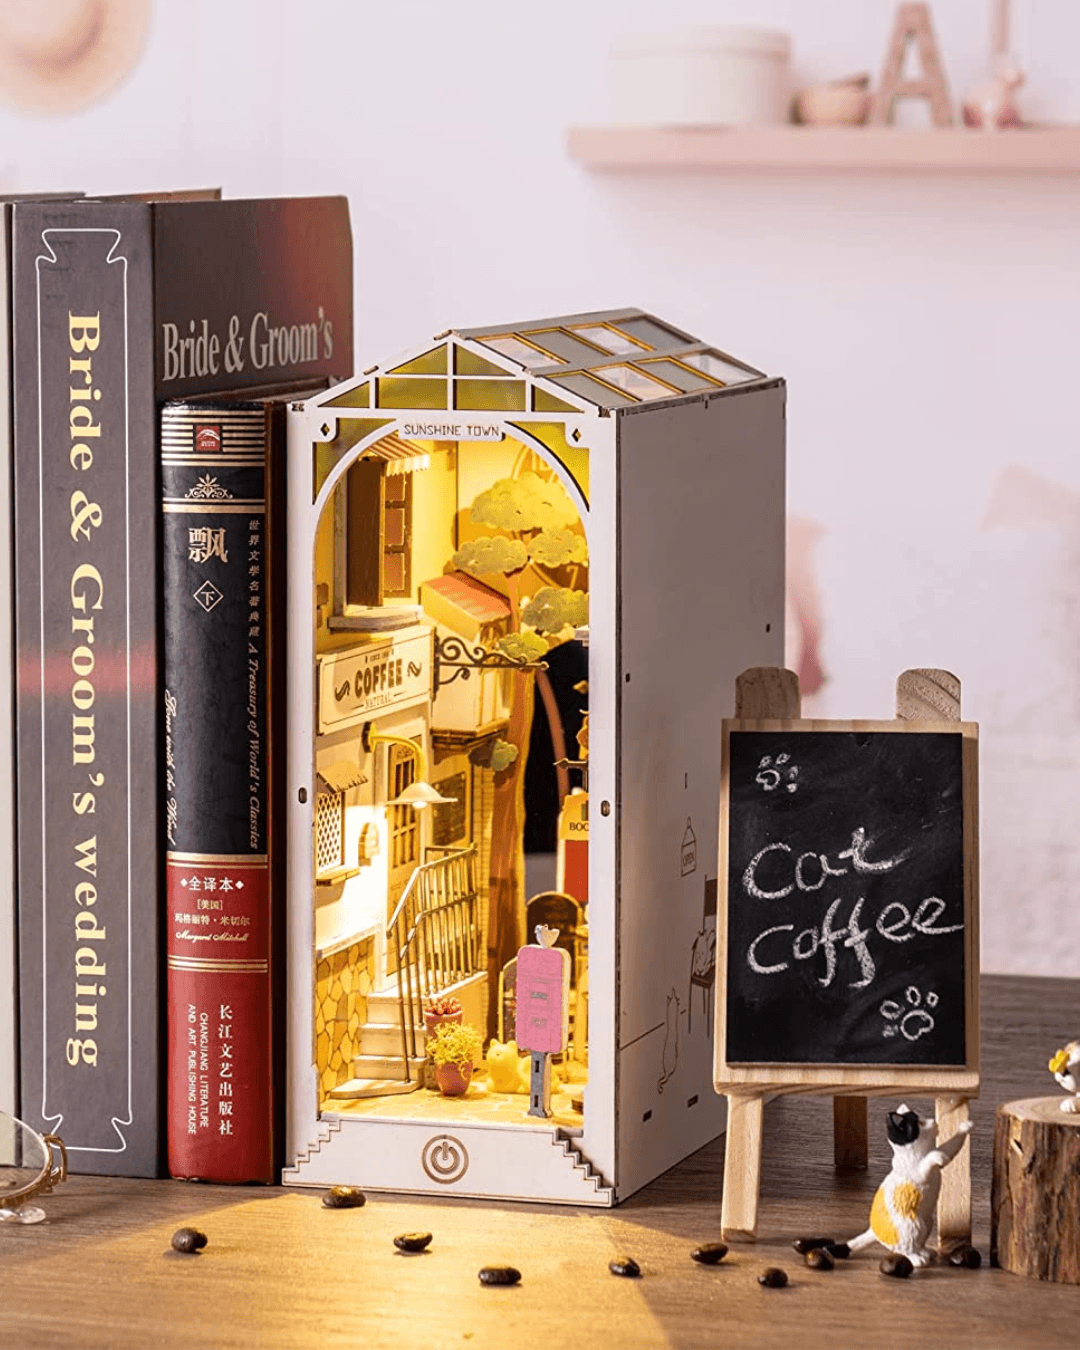 Best Themed Book Nooks for Your Bookshelf – ByAnavrin